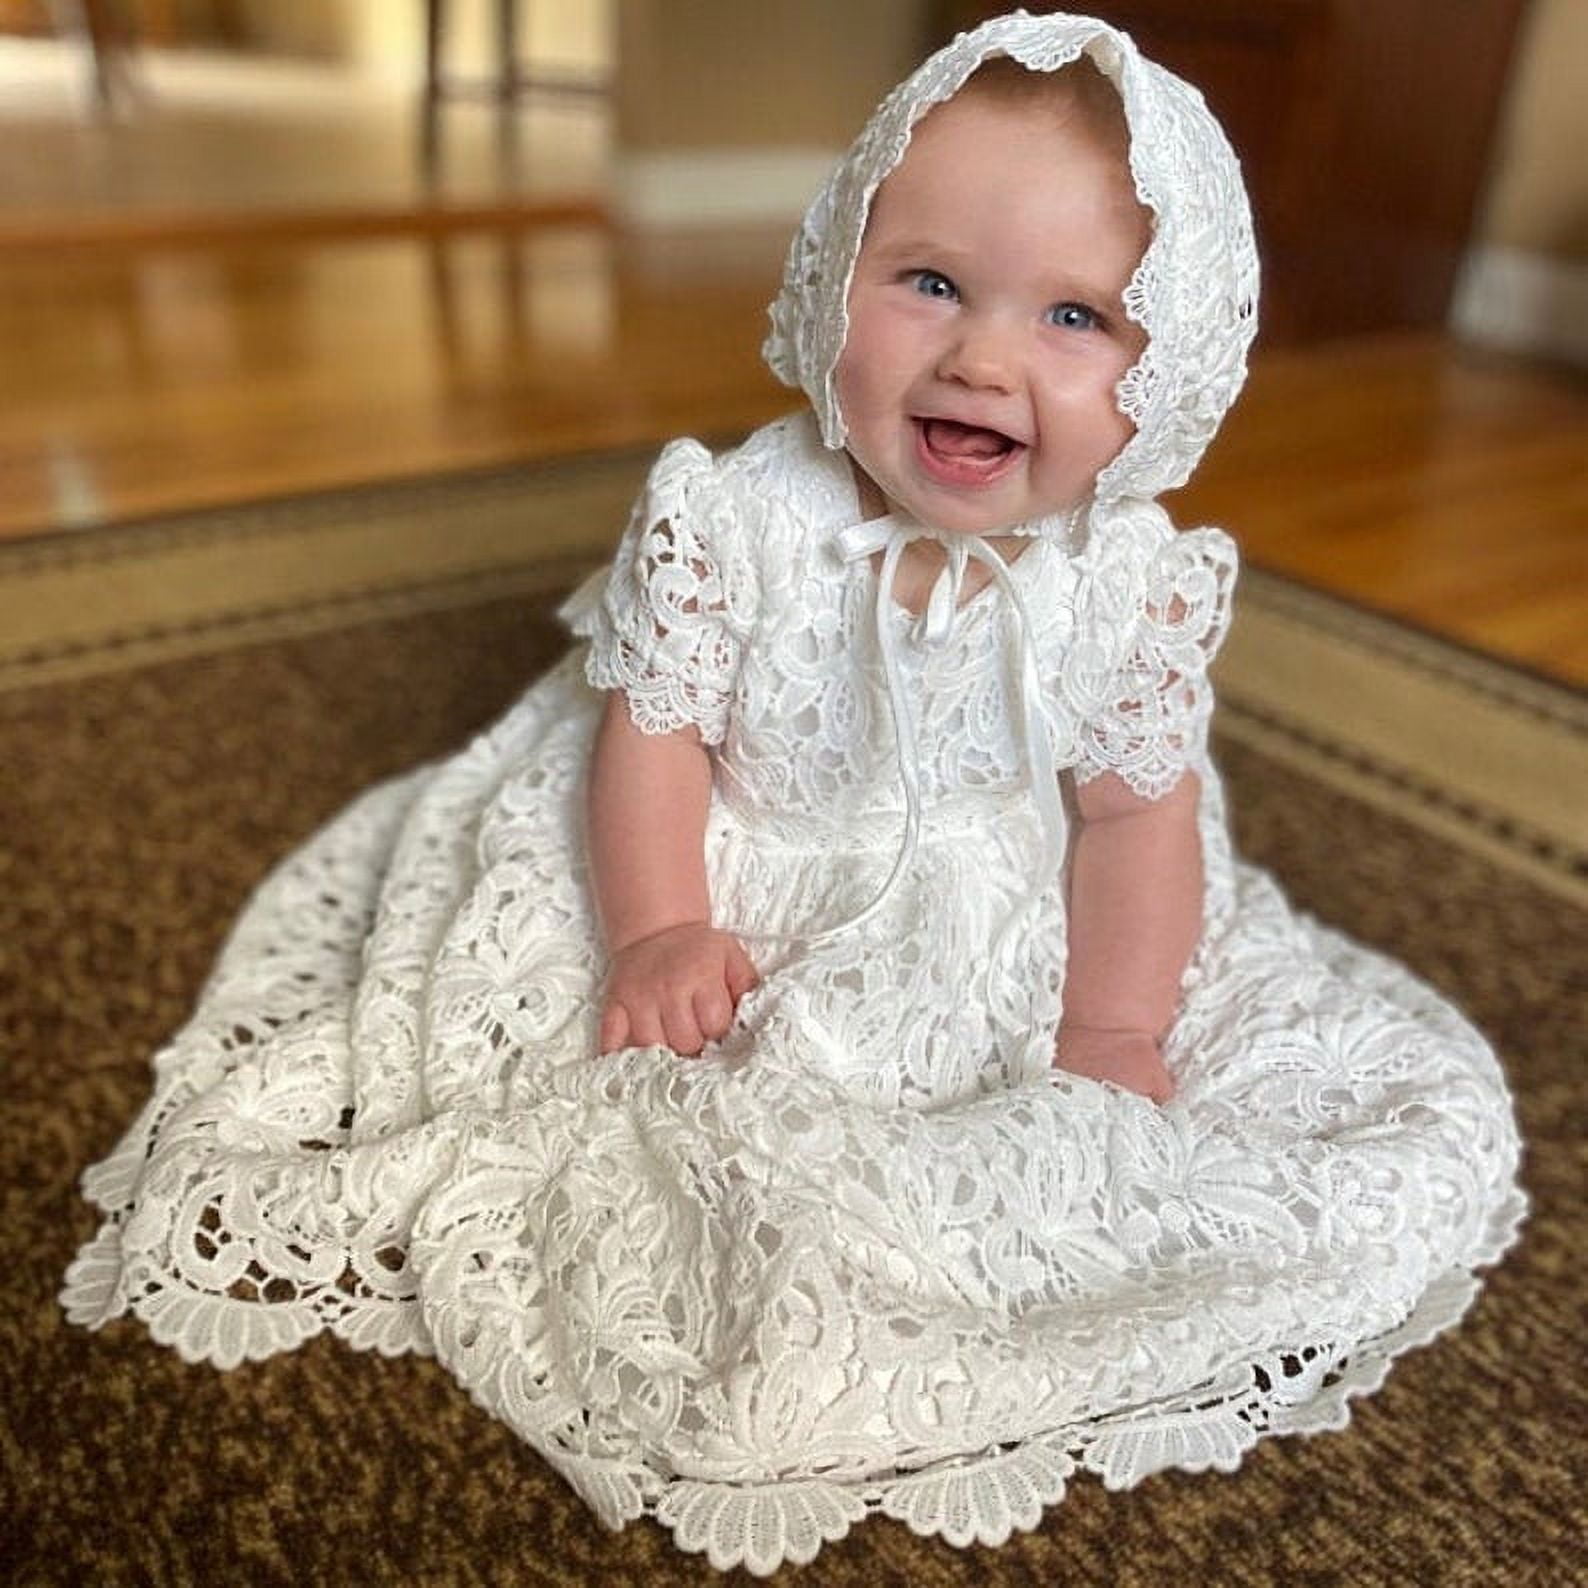 Baby Girls Baptism Dress Heirloom Christening Gown with Bonnet Lace Design  18M 